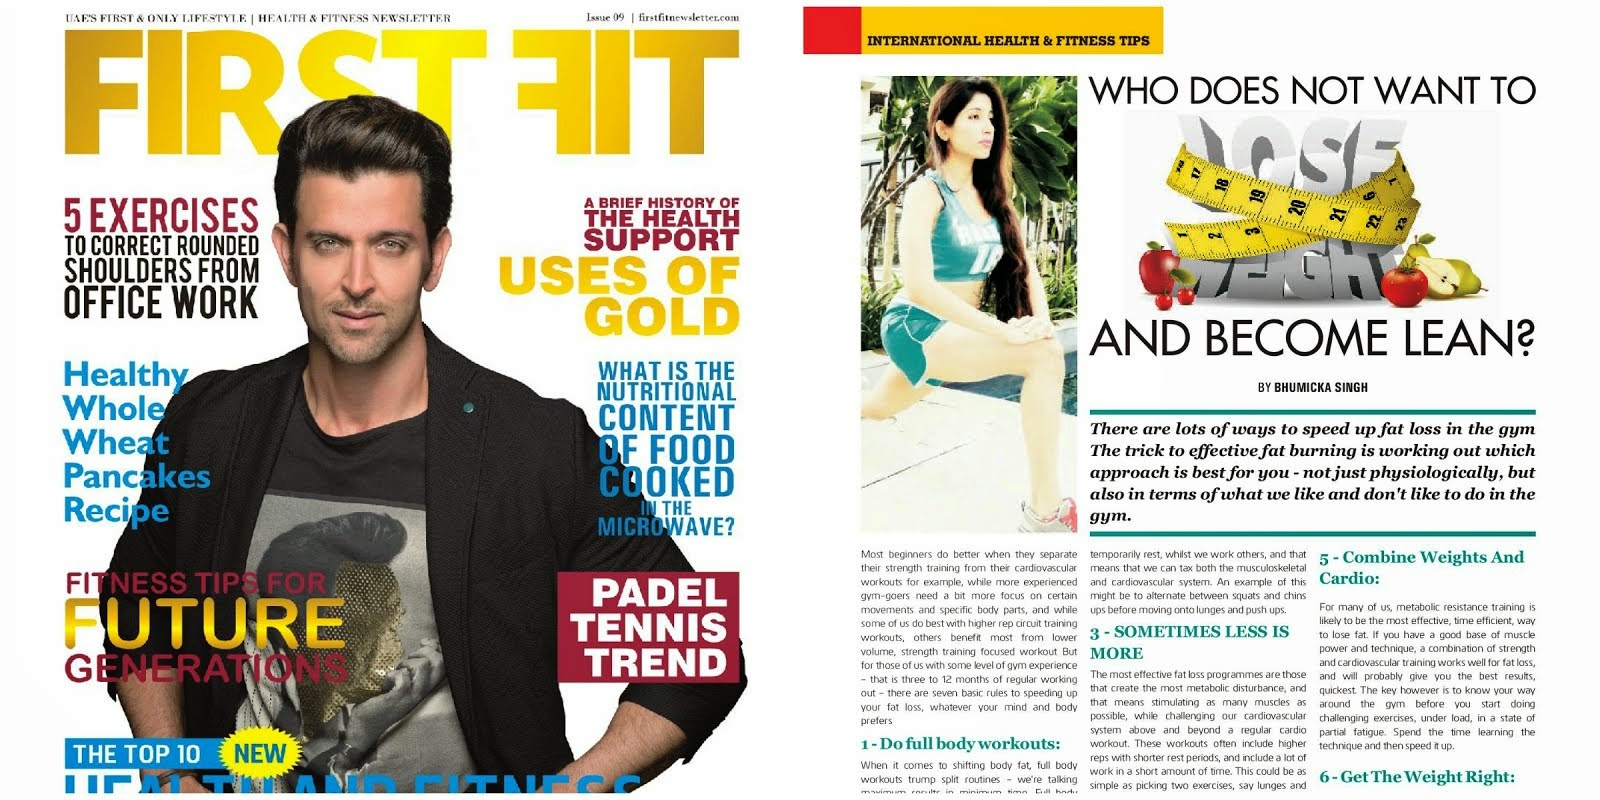 My Fitness Article Published With Hrithik Roshan On Cover Page